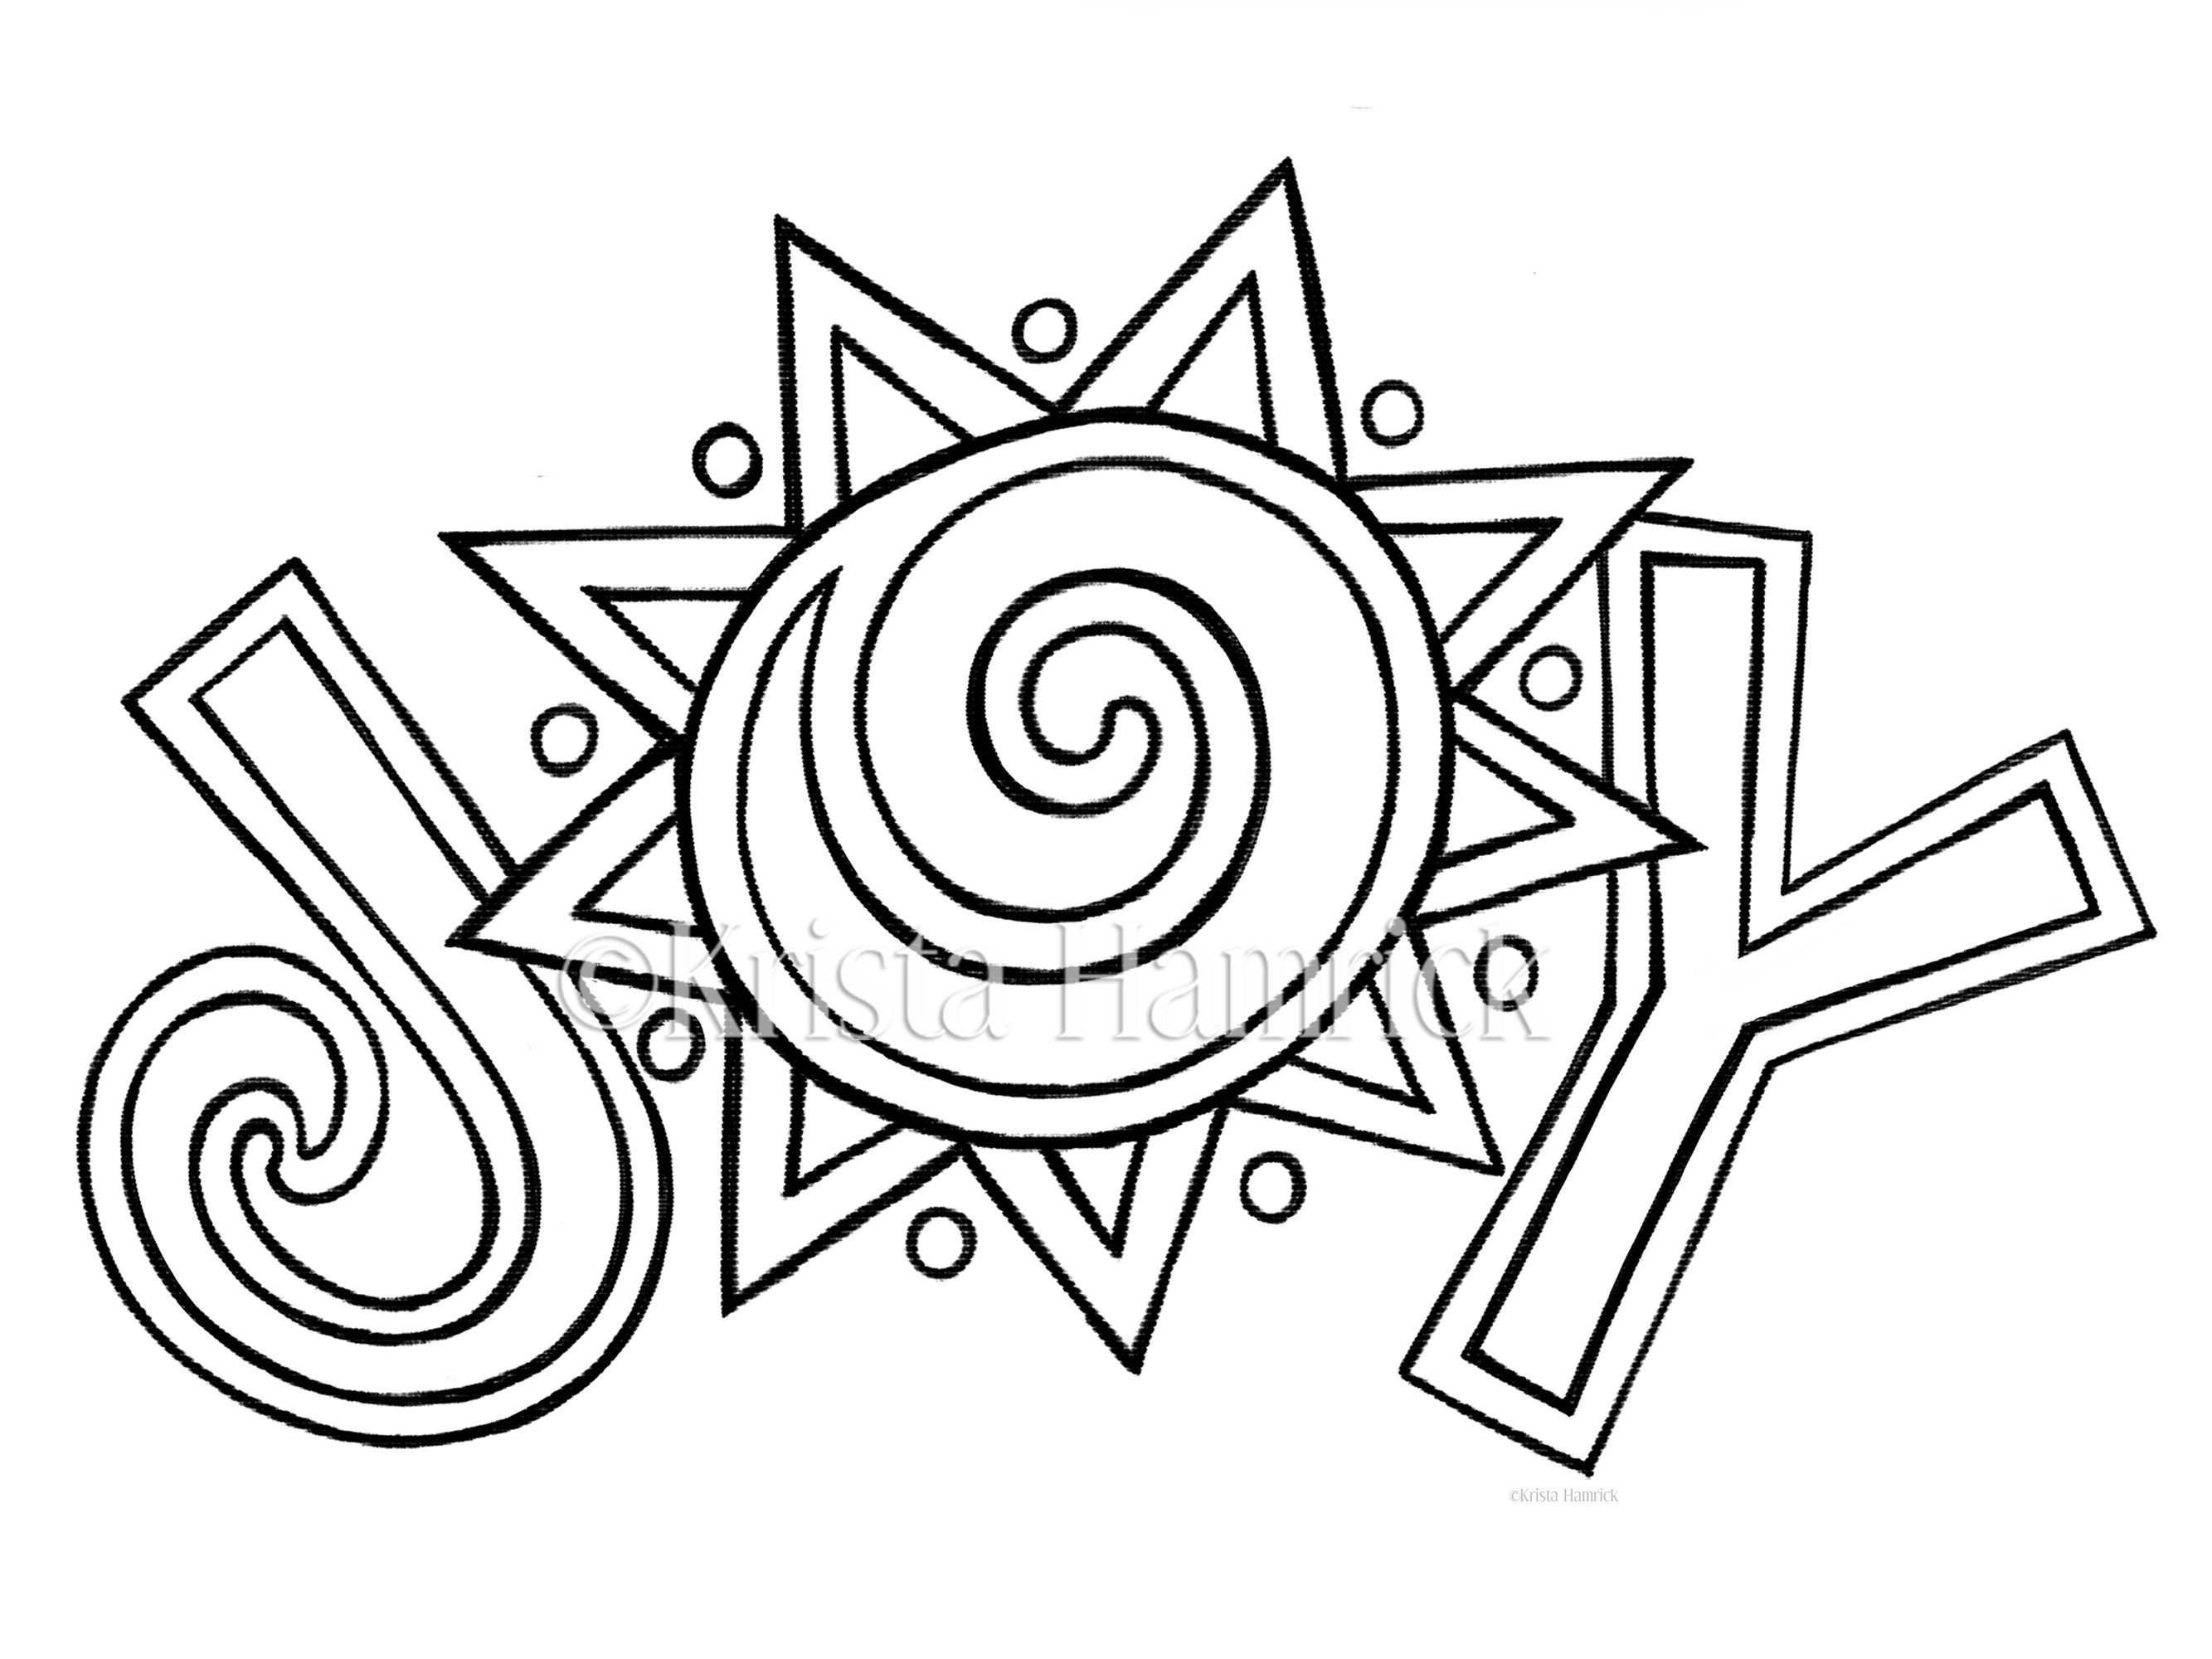 Joy coloring page x download now